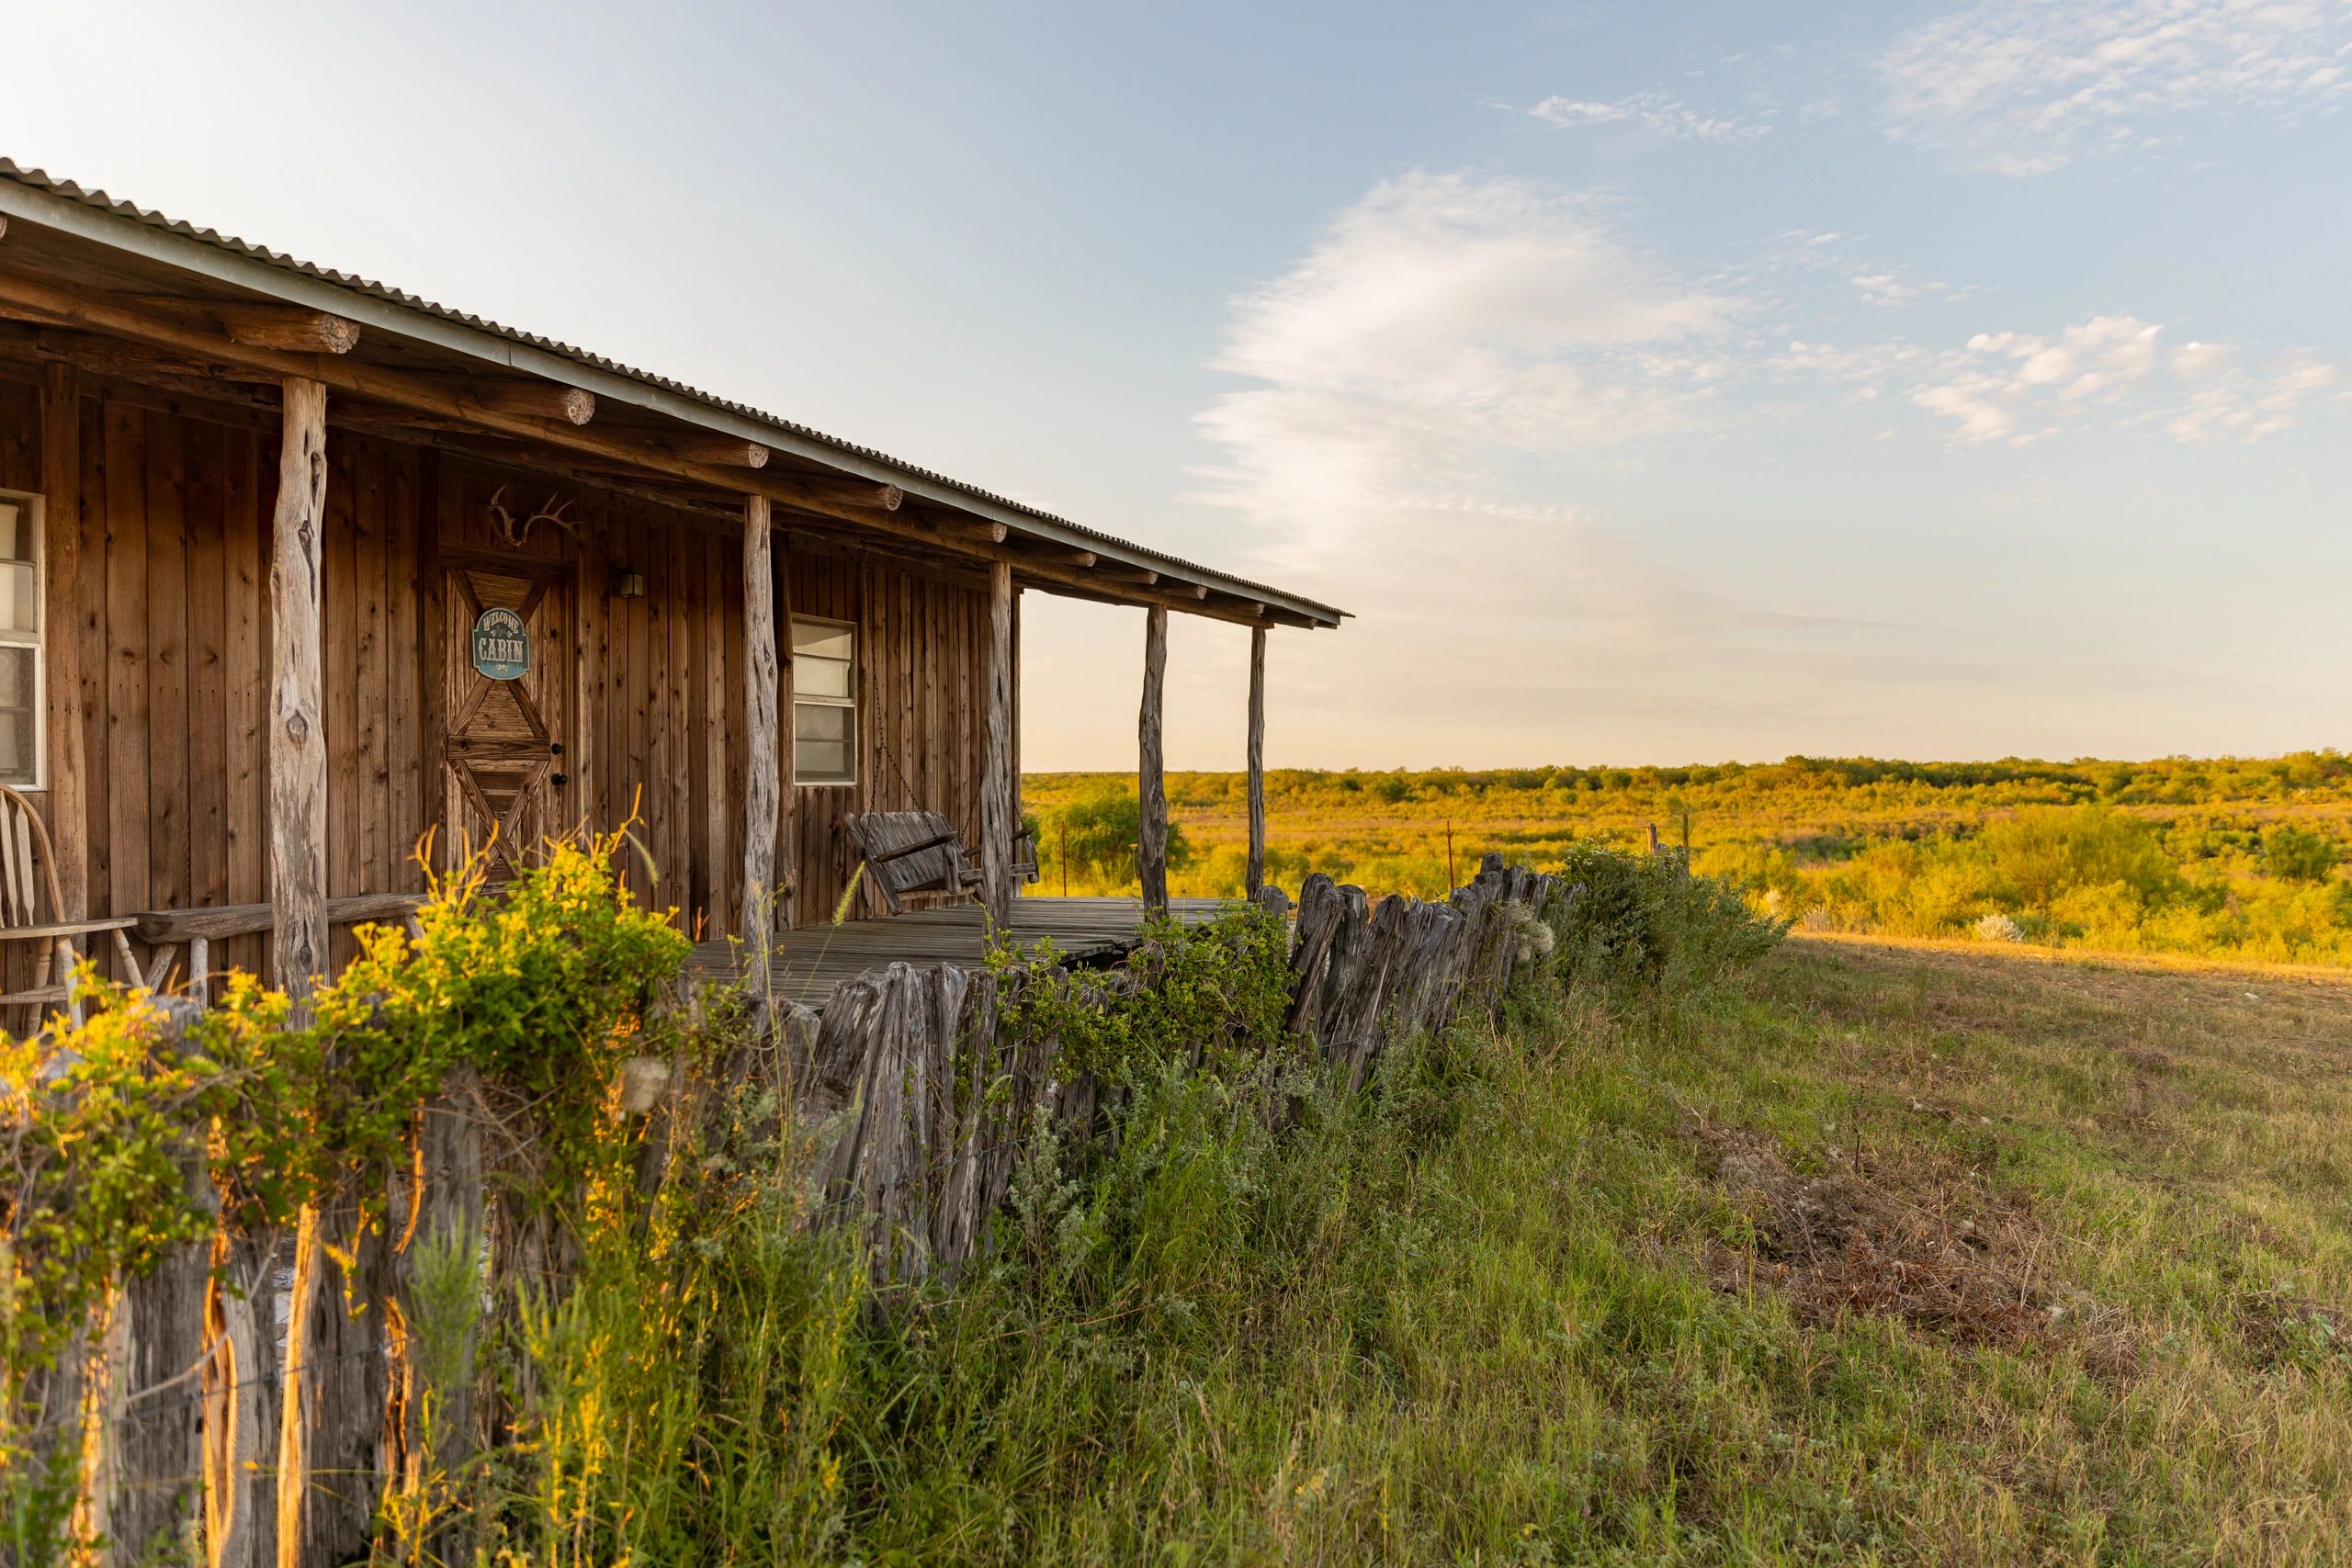 This is an image of South Texas ranch land from the hunting lodge.